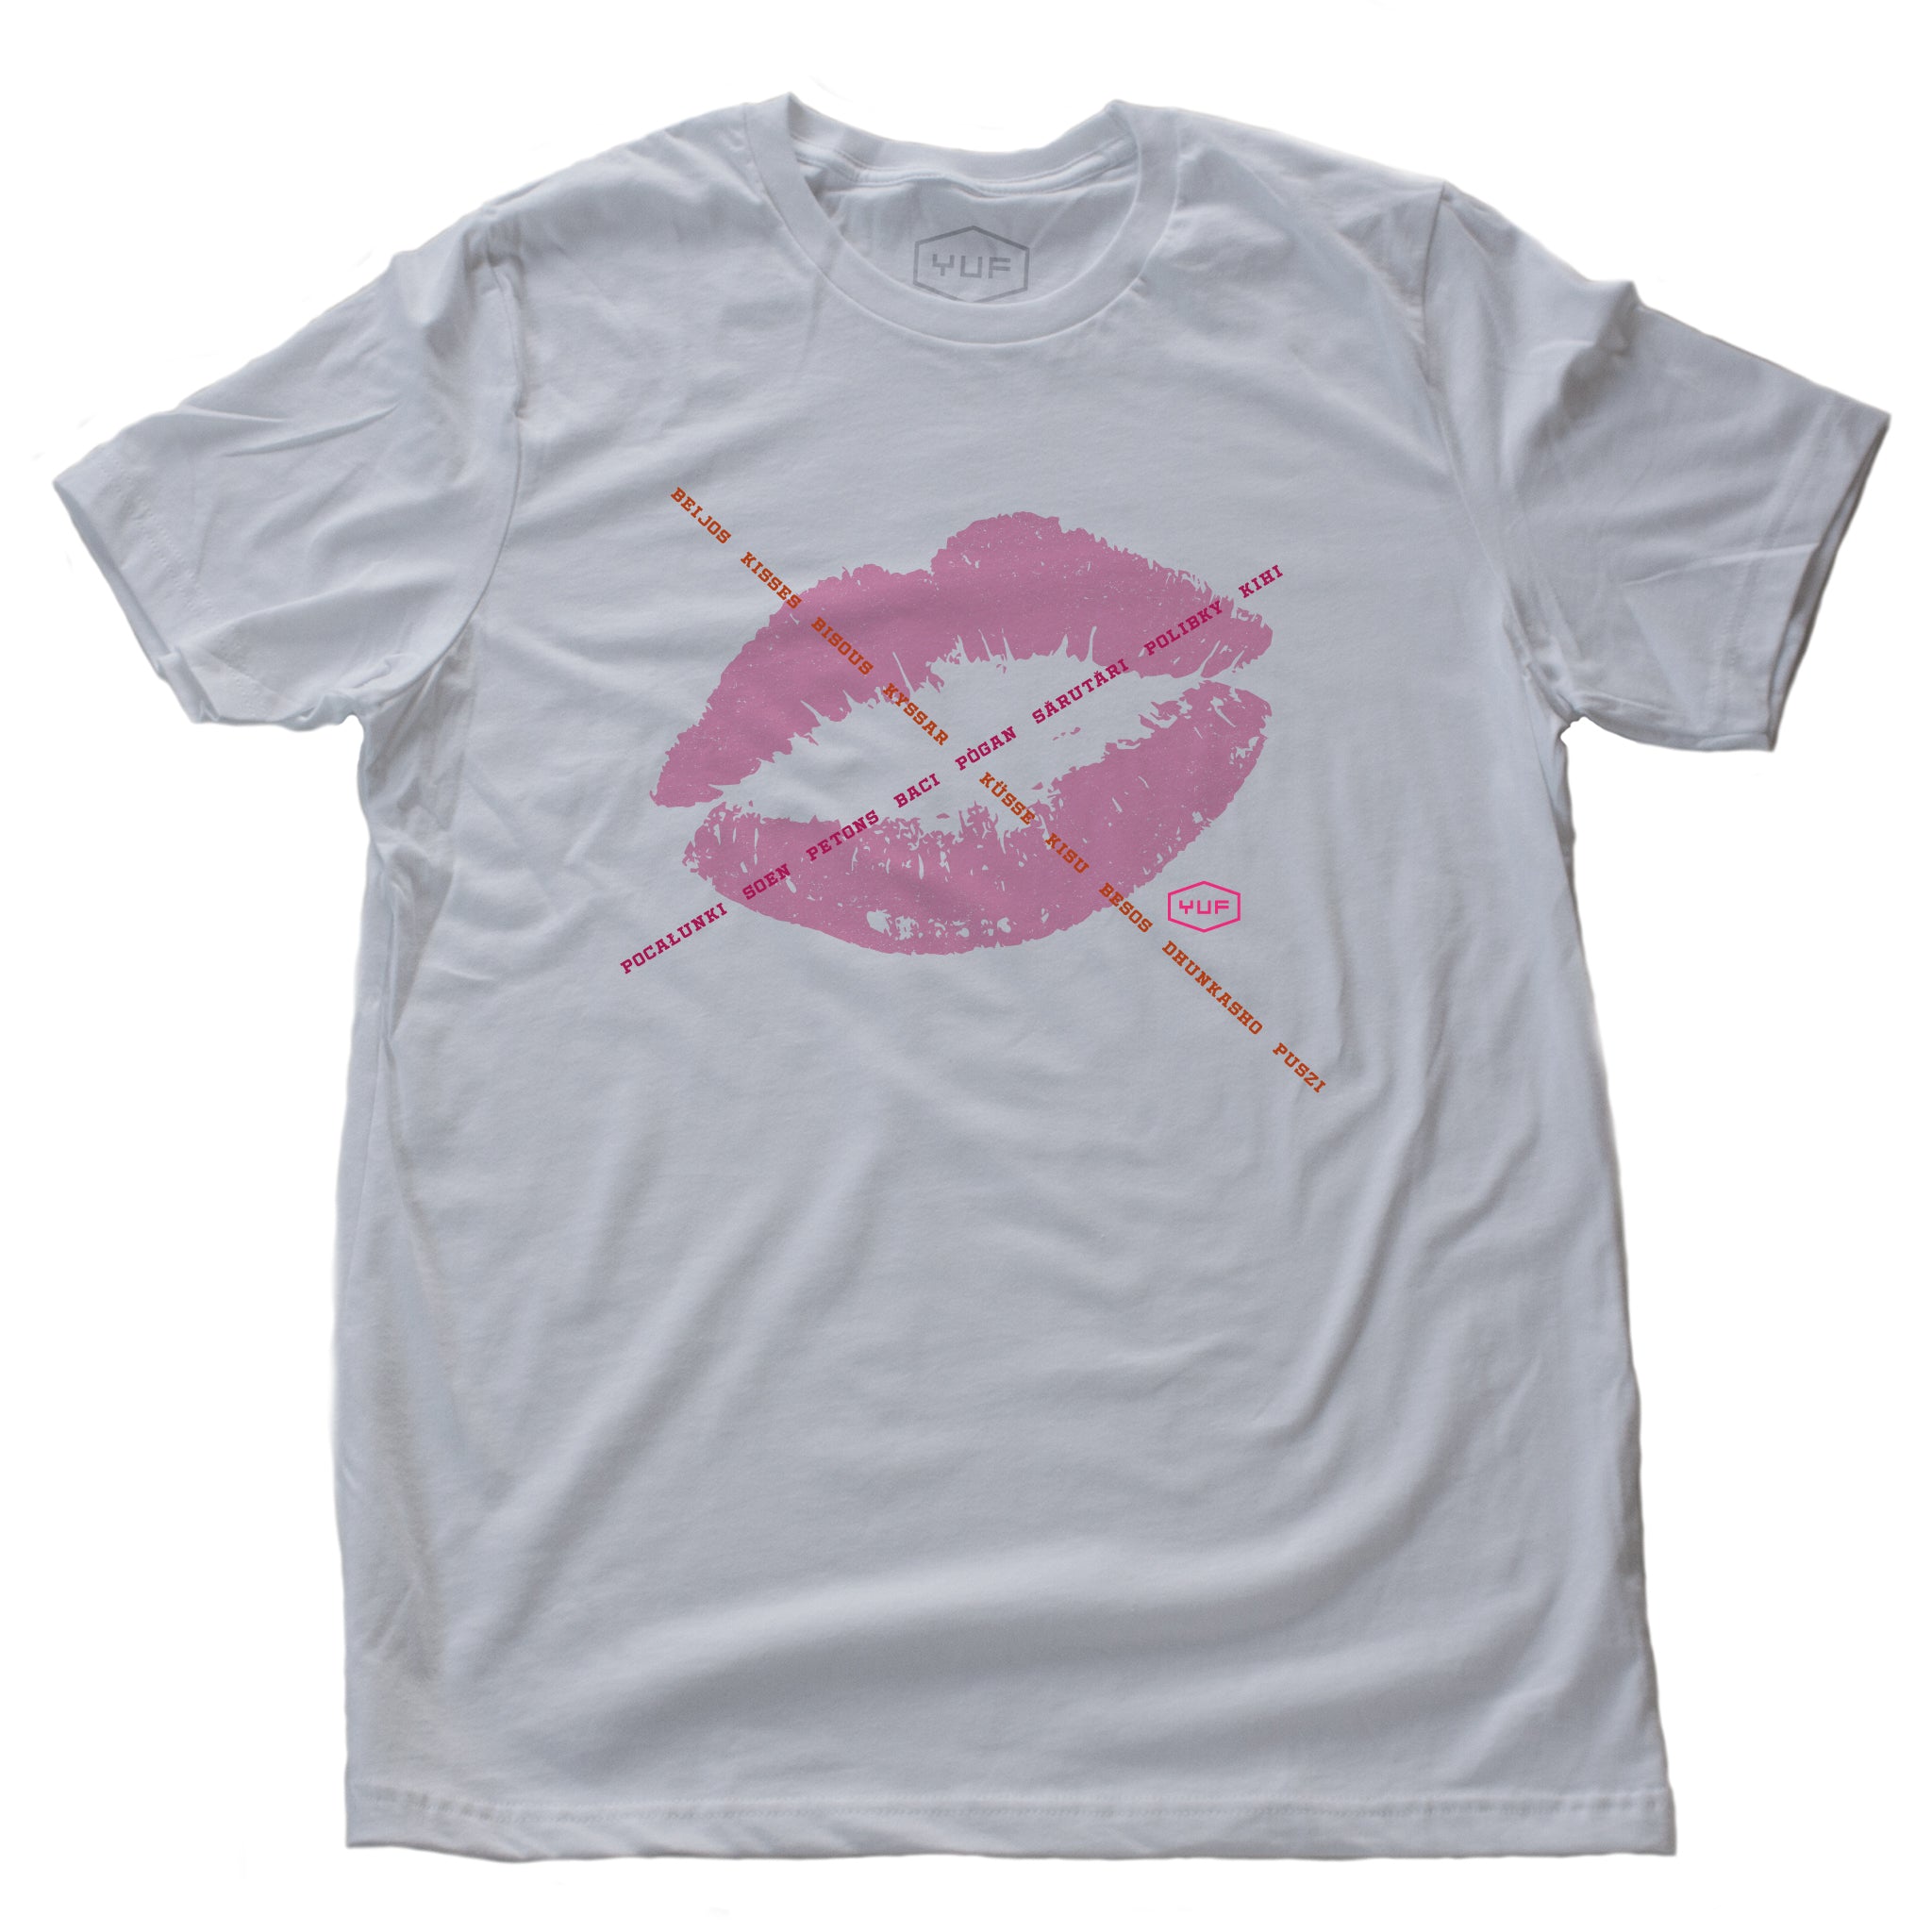 A unisex fashion t-shirt in white, featuring a lipstick kiss graphic, criss-crossed by the word for “kiss” in various languages. A classic icon reminiscent of Marilyn Monroe’s signature mark. By fashion brand YUF, from wolfsaint.net